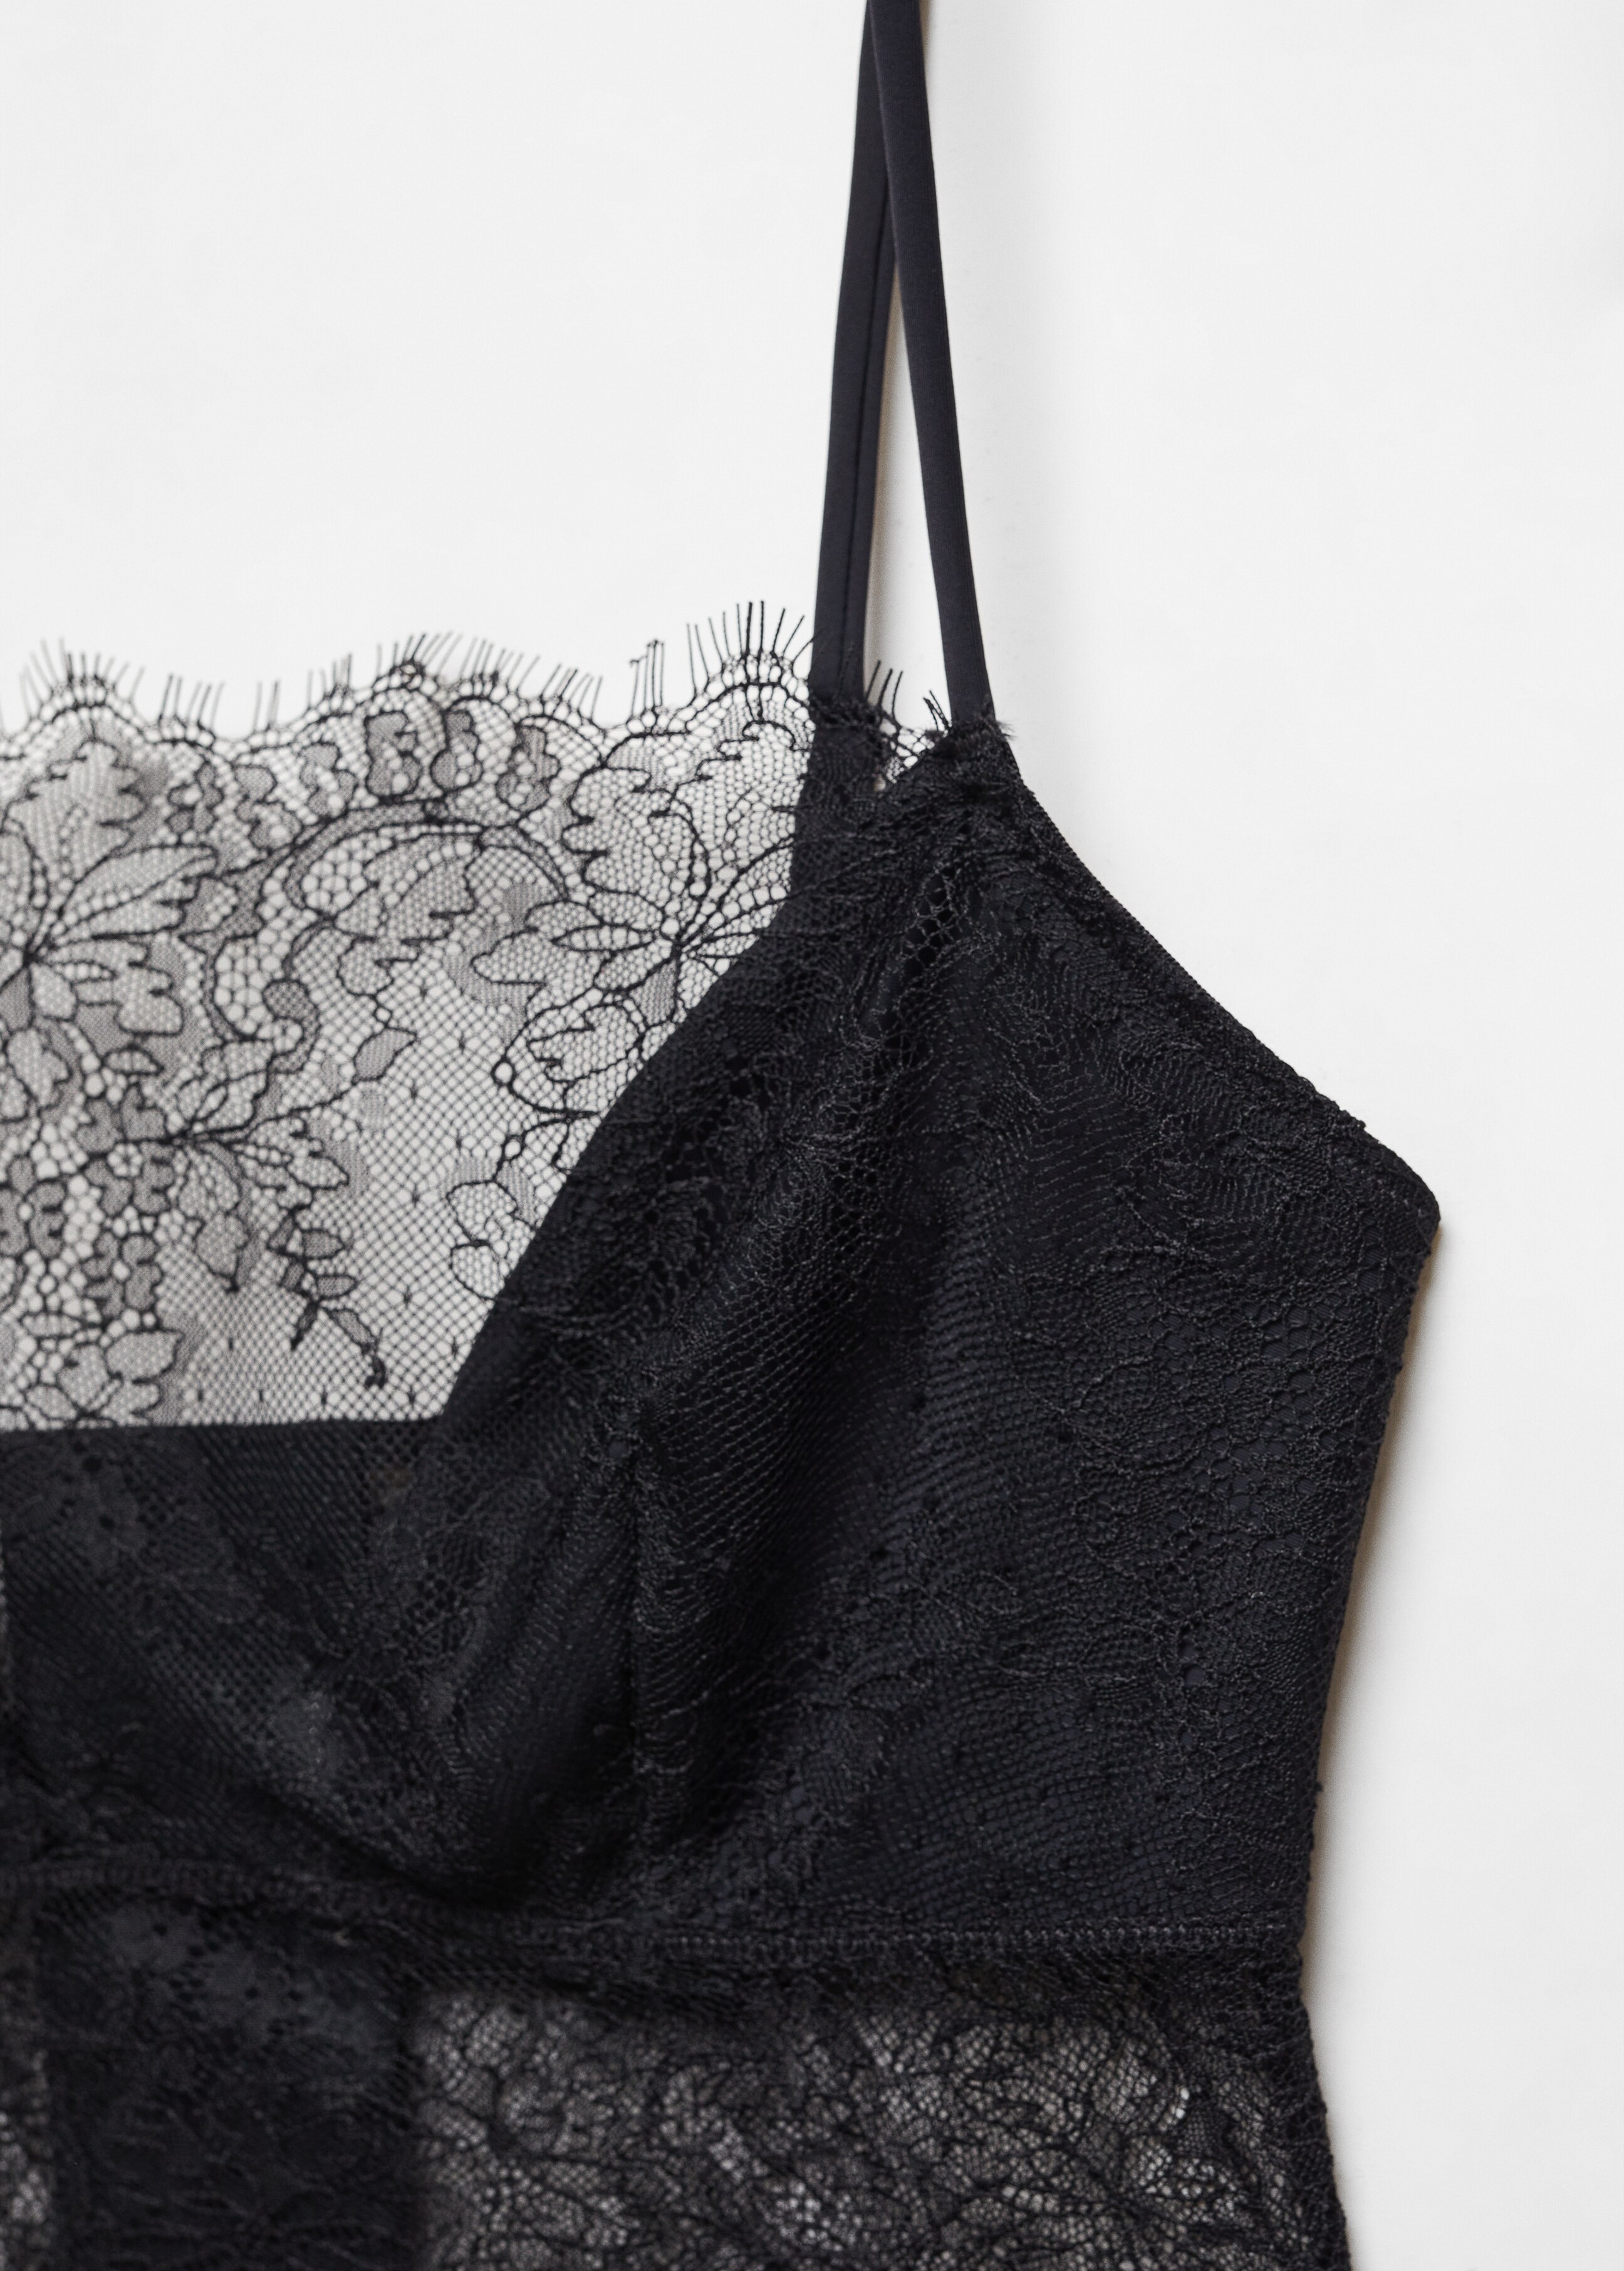 Lace bralette - Details of the article 8